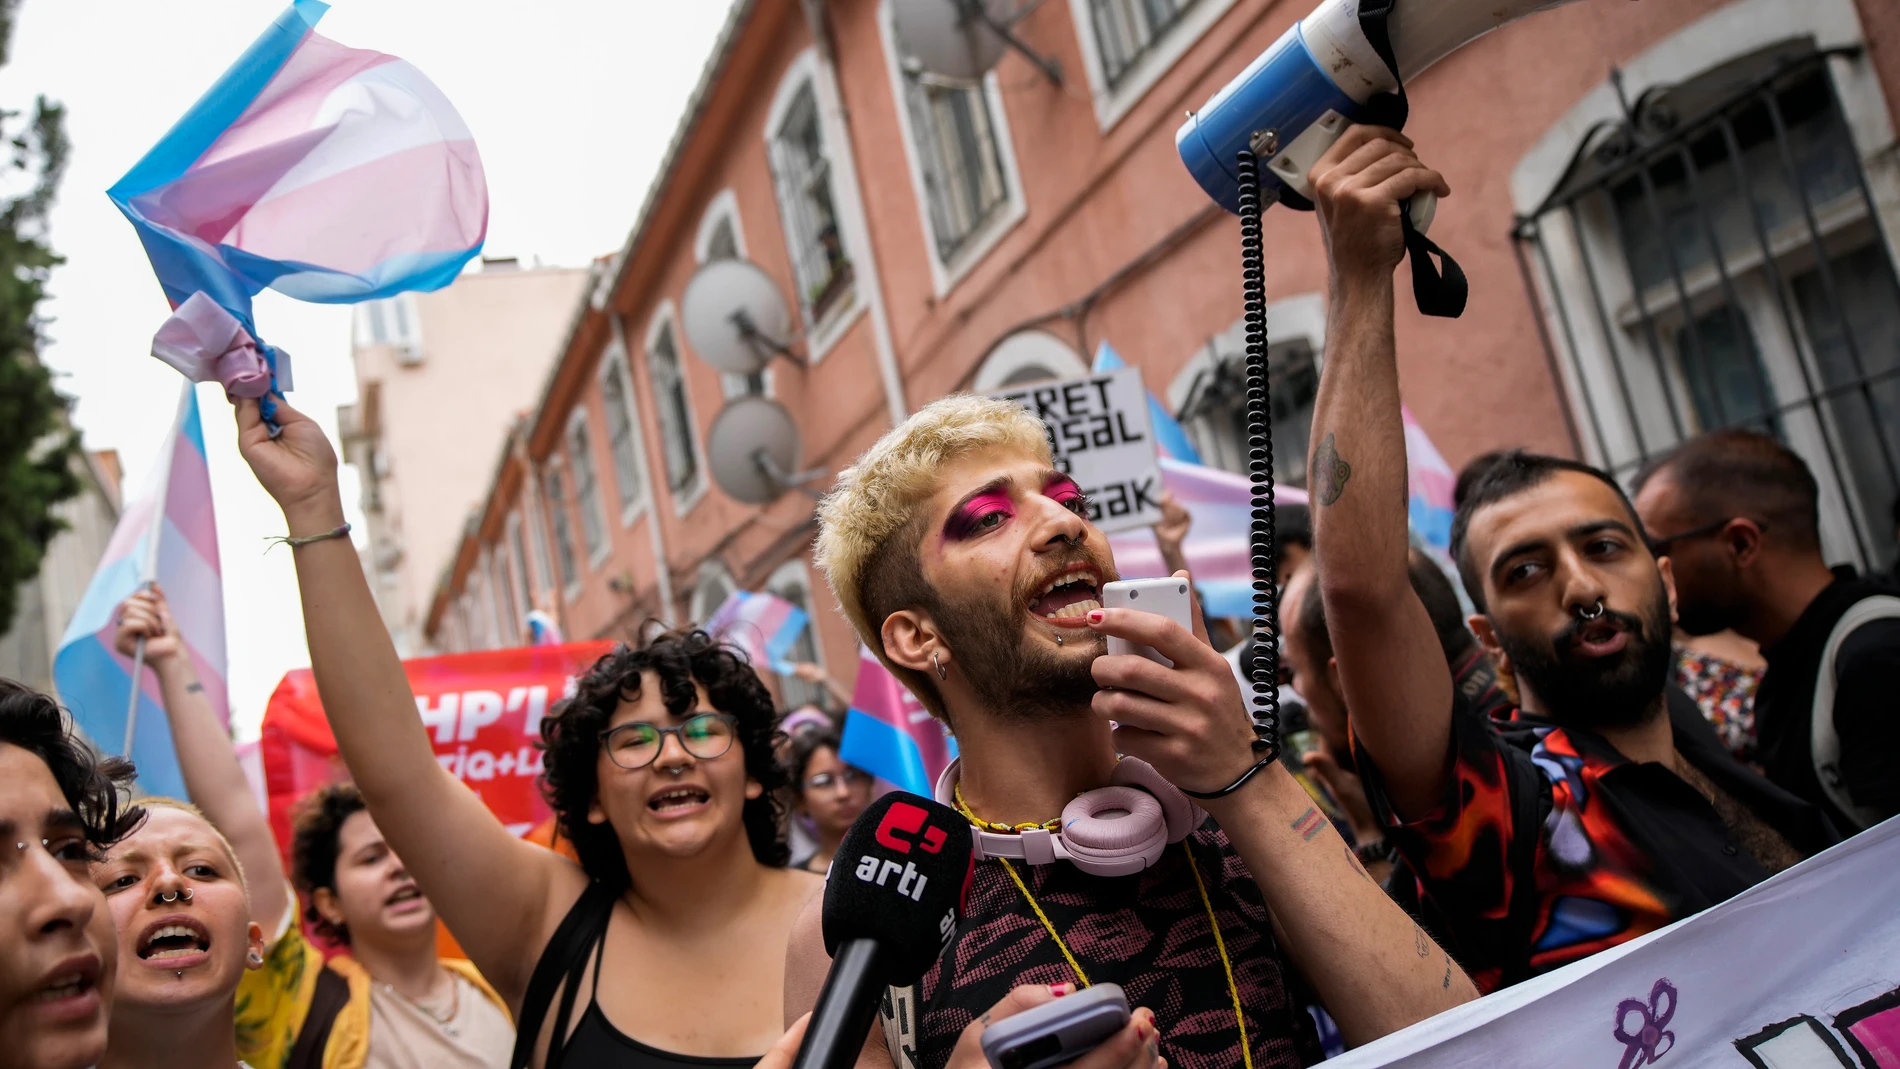 People shout slogans during a march in support of transgender people and their rights as part of the LGBTQ Pride week in Istanbul, Turkey, Sunday, June 18, 2023. (AP Photo/Emrah Gurel)